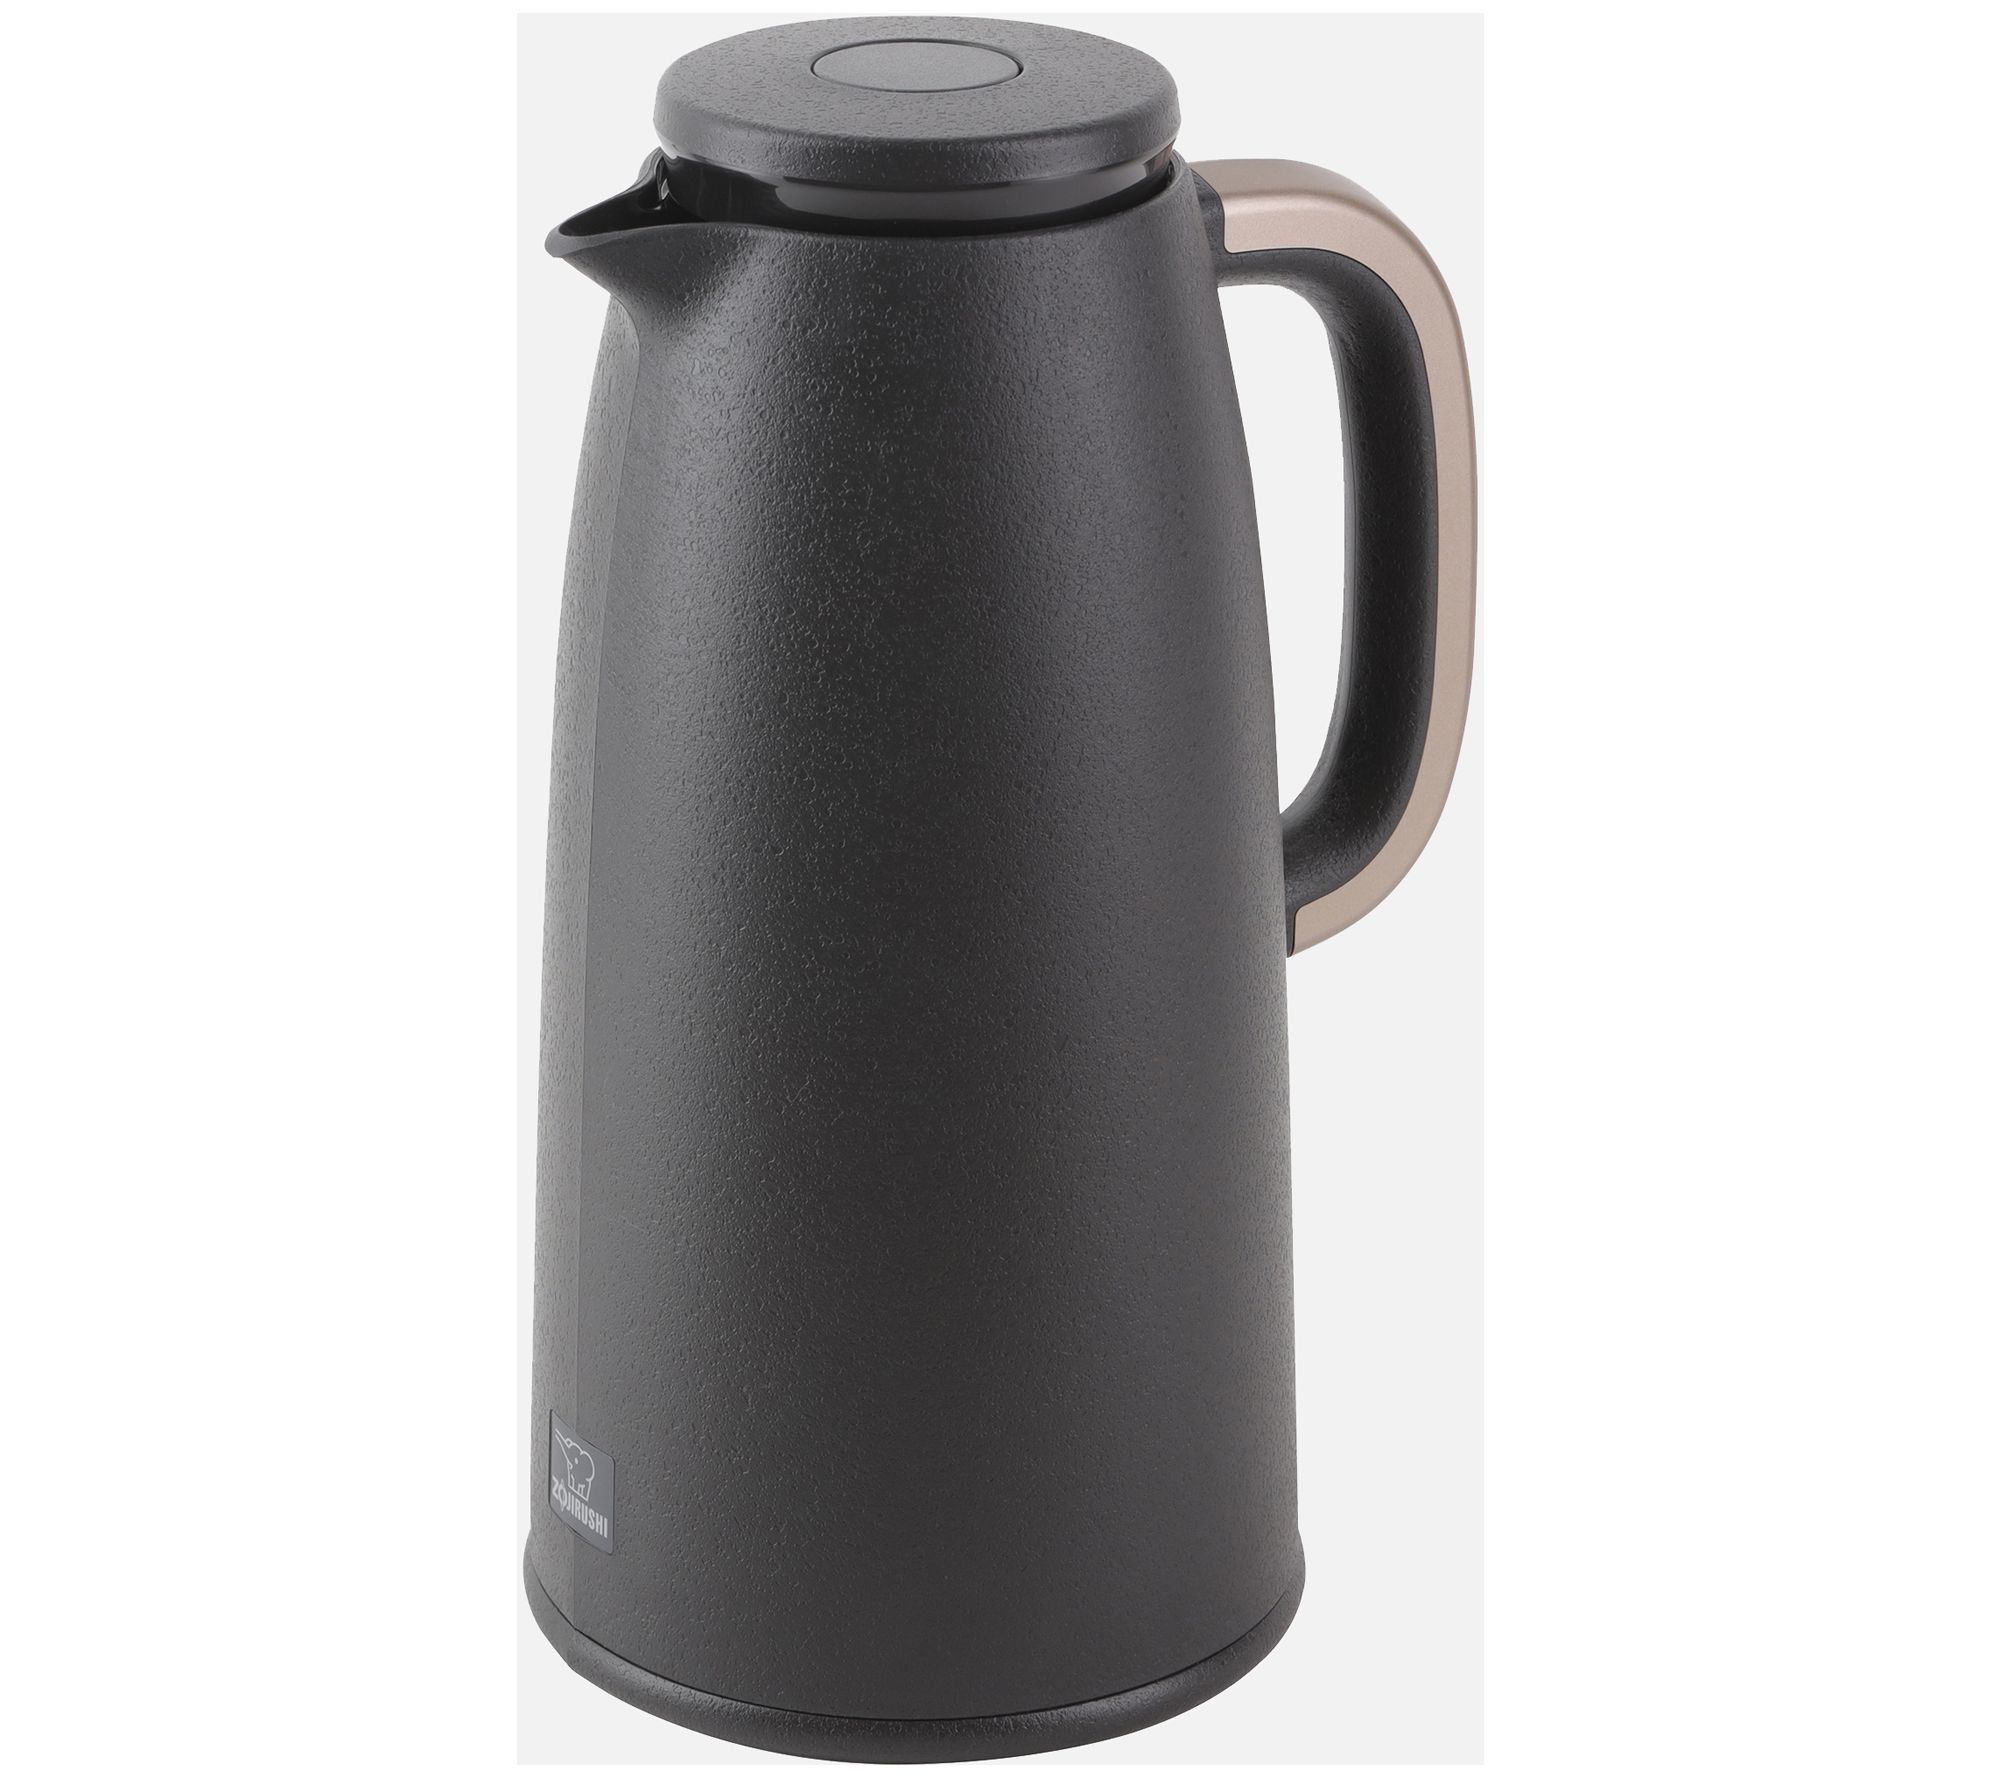  Thermal Carafe,Coffee Carafe Pitcher Stainless Steel Thermal Jug,  Large-Capacity Portable Thermos Insulation Kettle, Small Home Office Coffee  Pot, Teapot Thermos (Color : A): Home & Kitchen